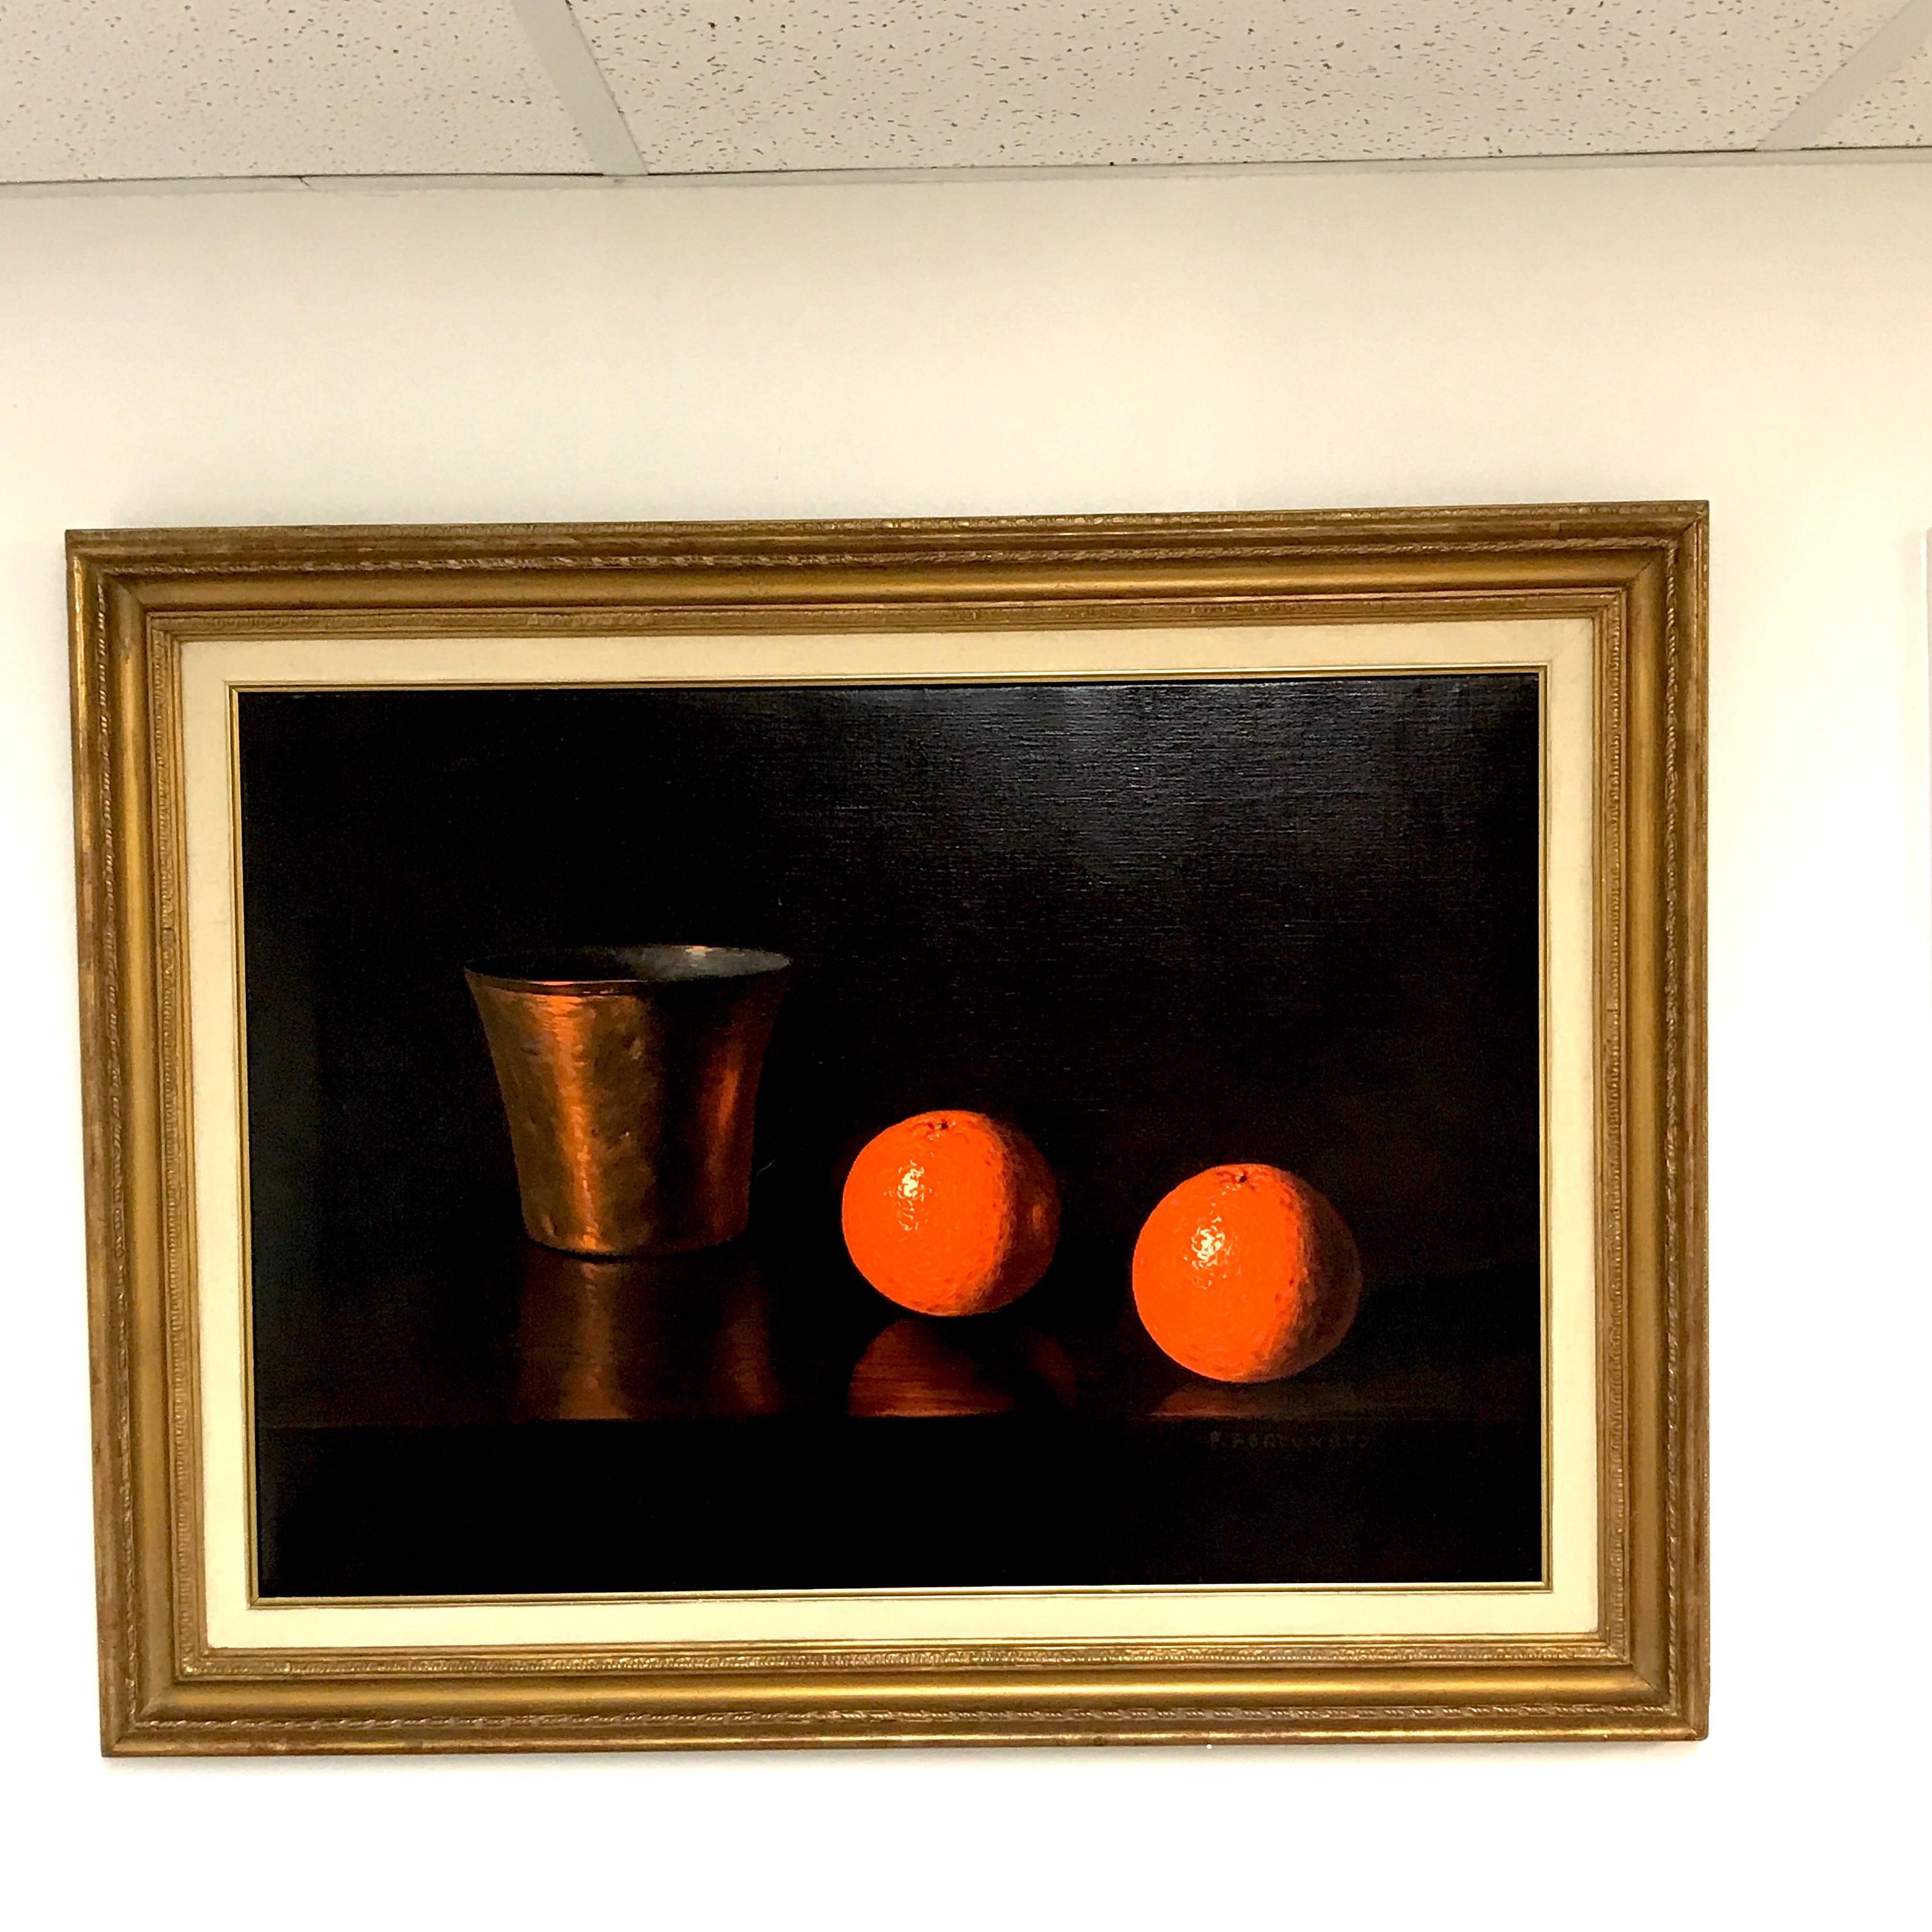 Italian still life Persimmons & Copper, by P. Fortunato
Oil on canvas
27.5' x 19.5'
Signed Lower Right & verso with inscription and date of 1970.
In a gold leaf Frame 34